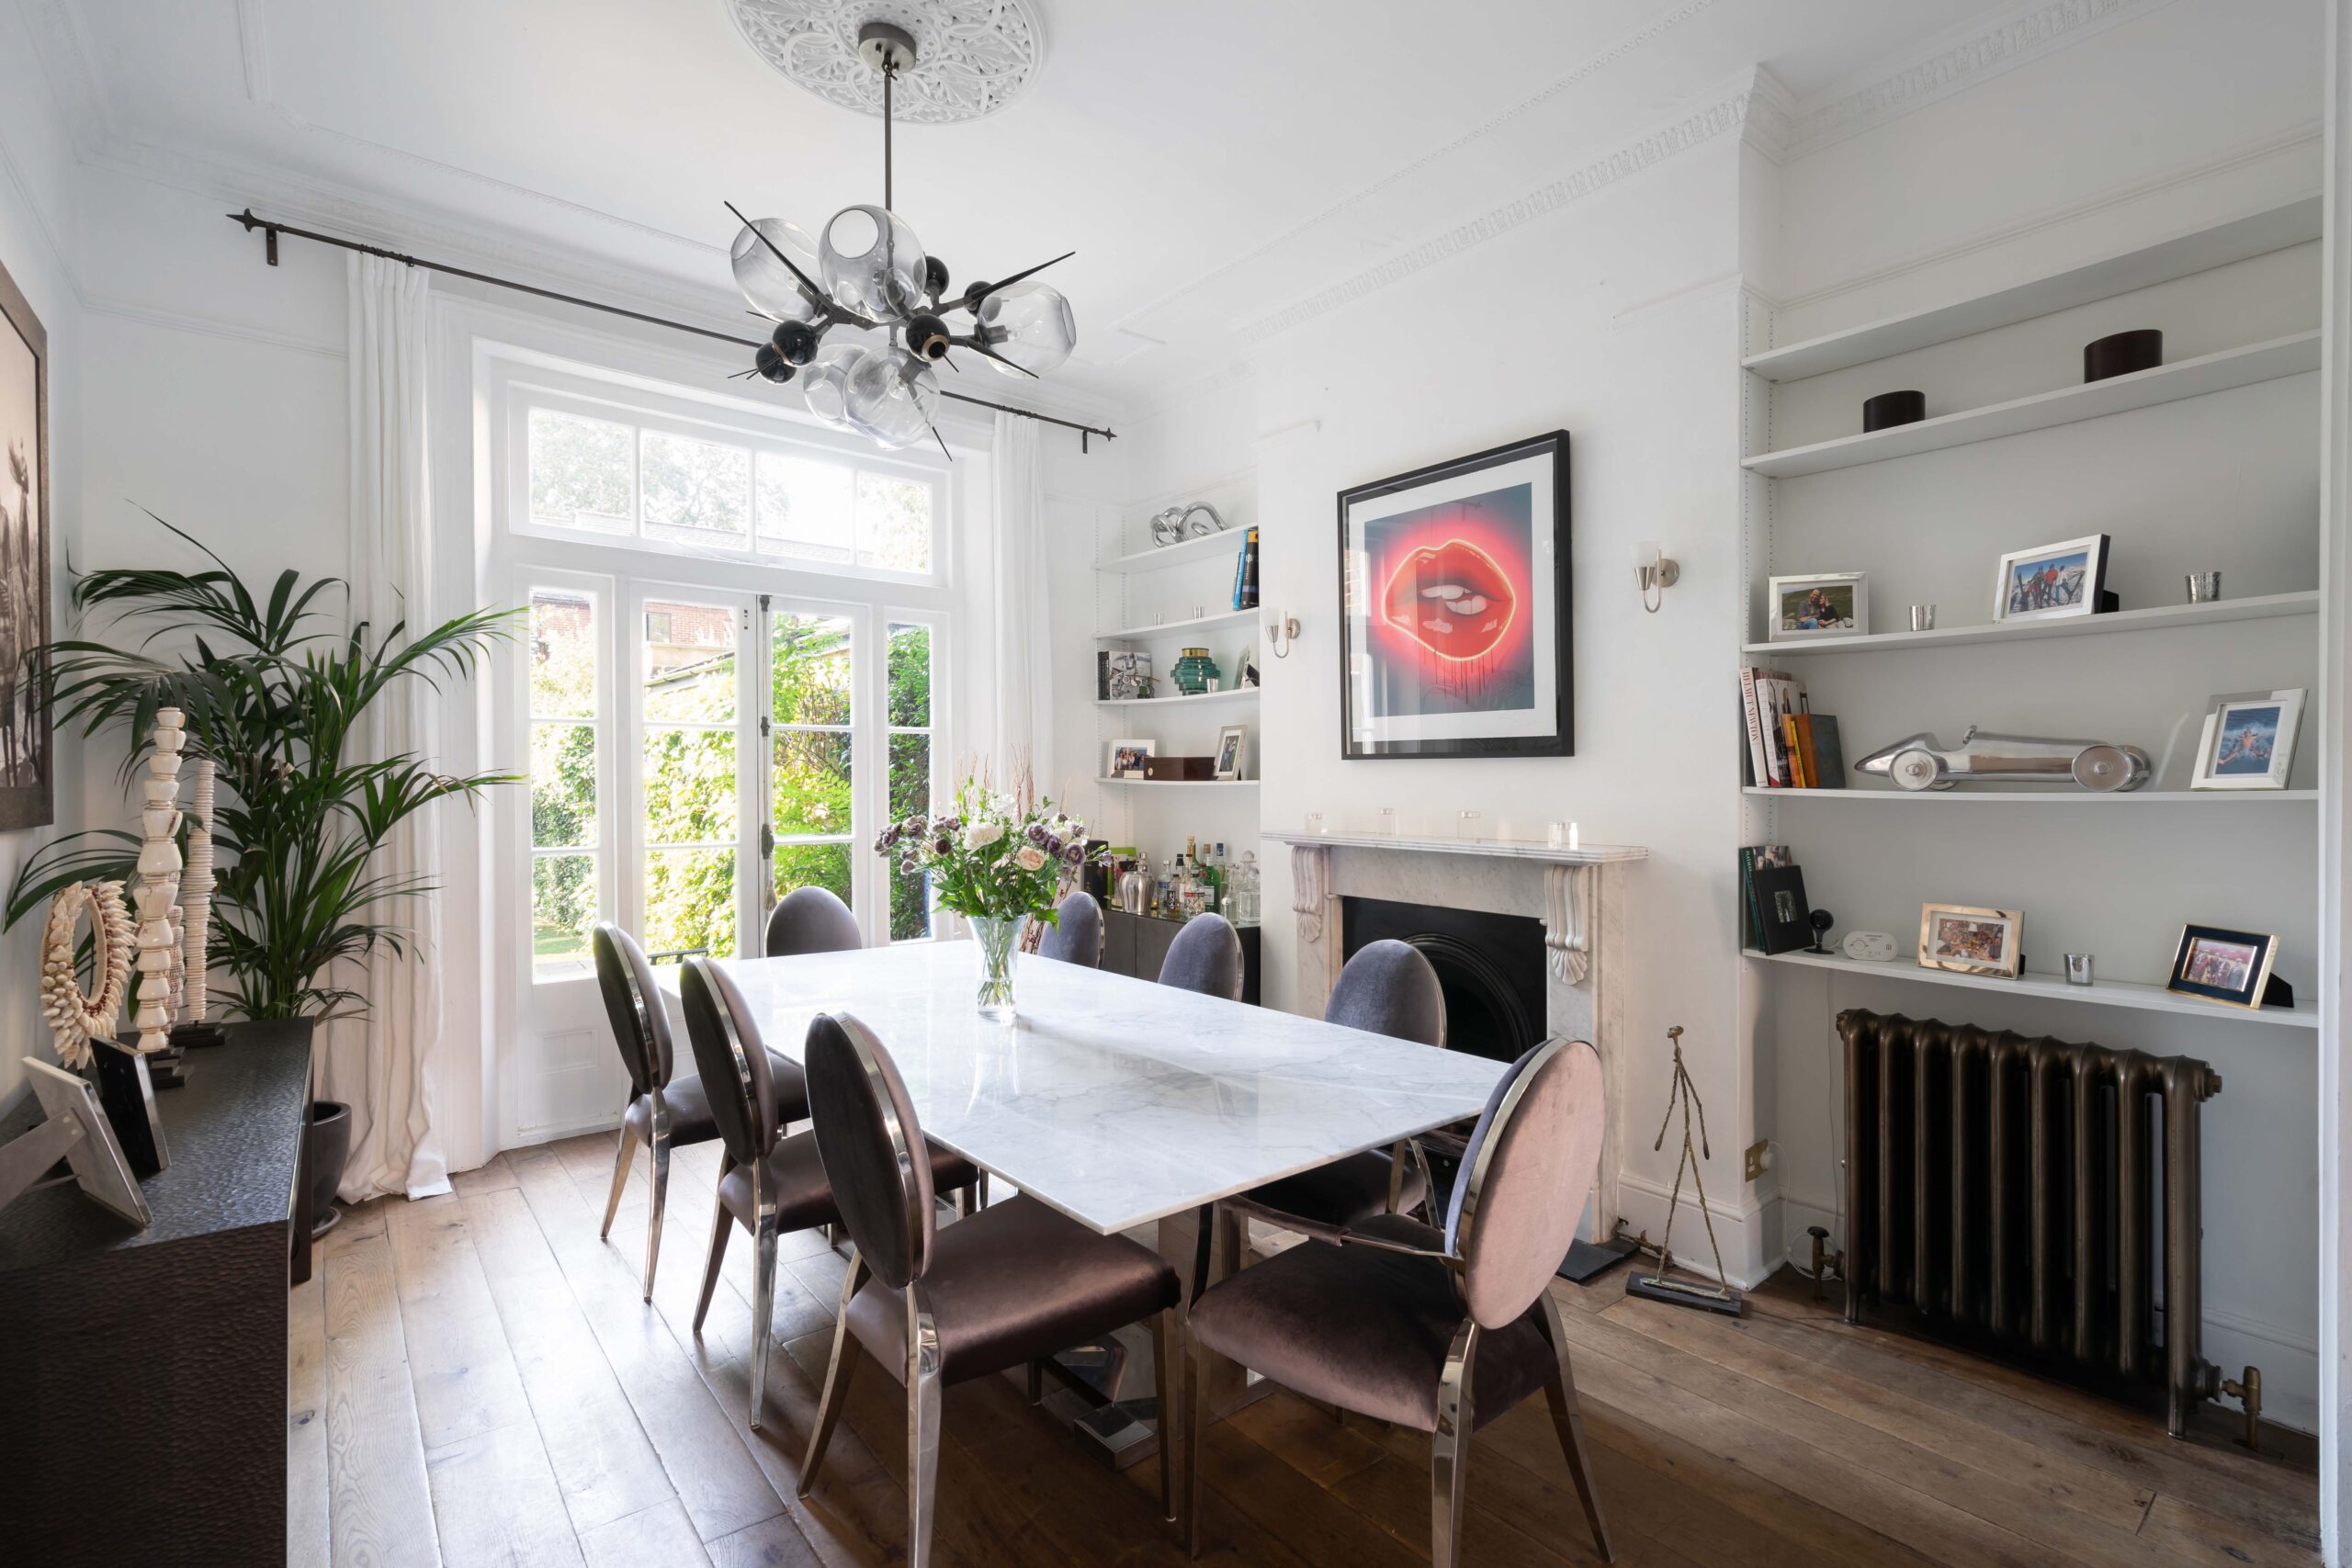 For Sale: St Marks Road North Kensington W10 stylish dining room with French doors